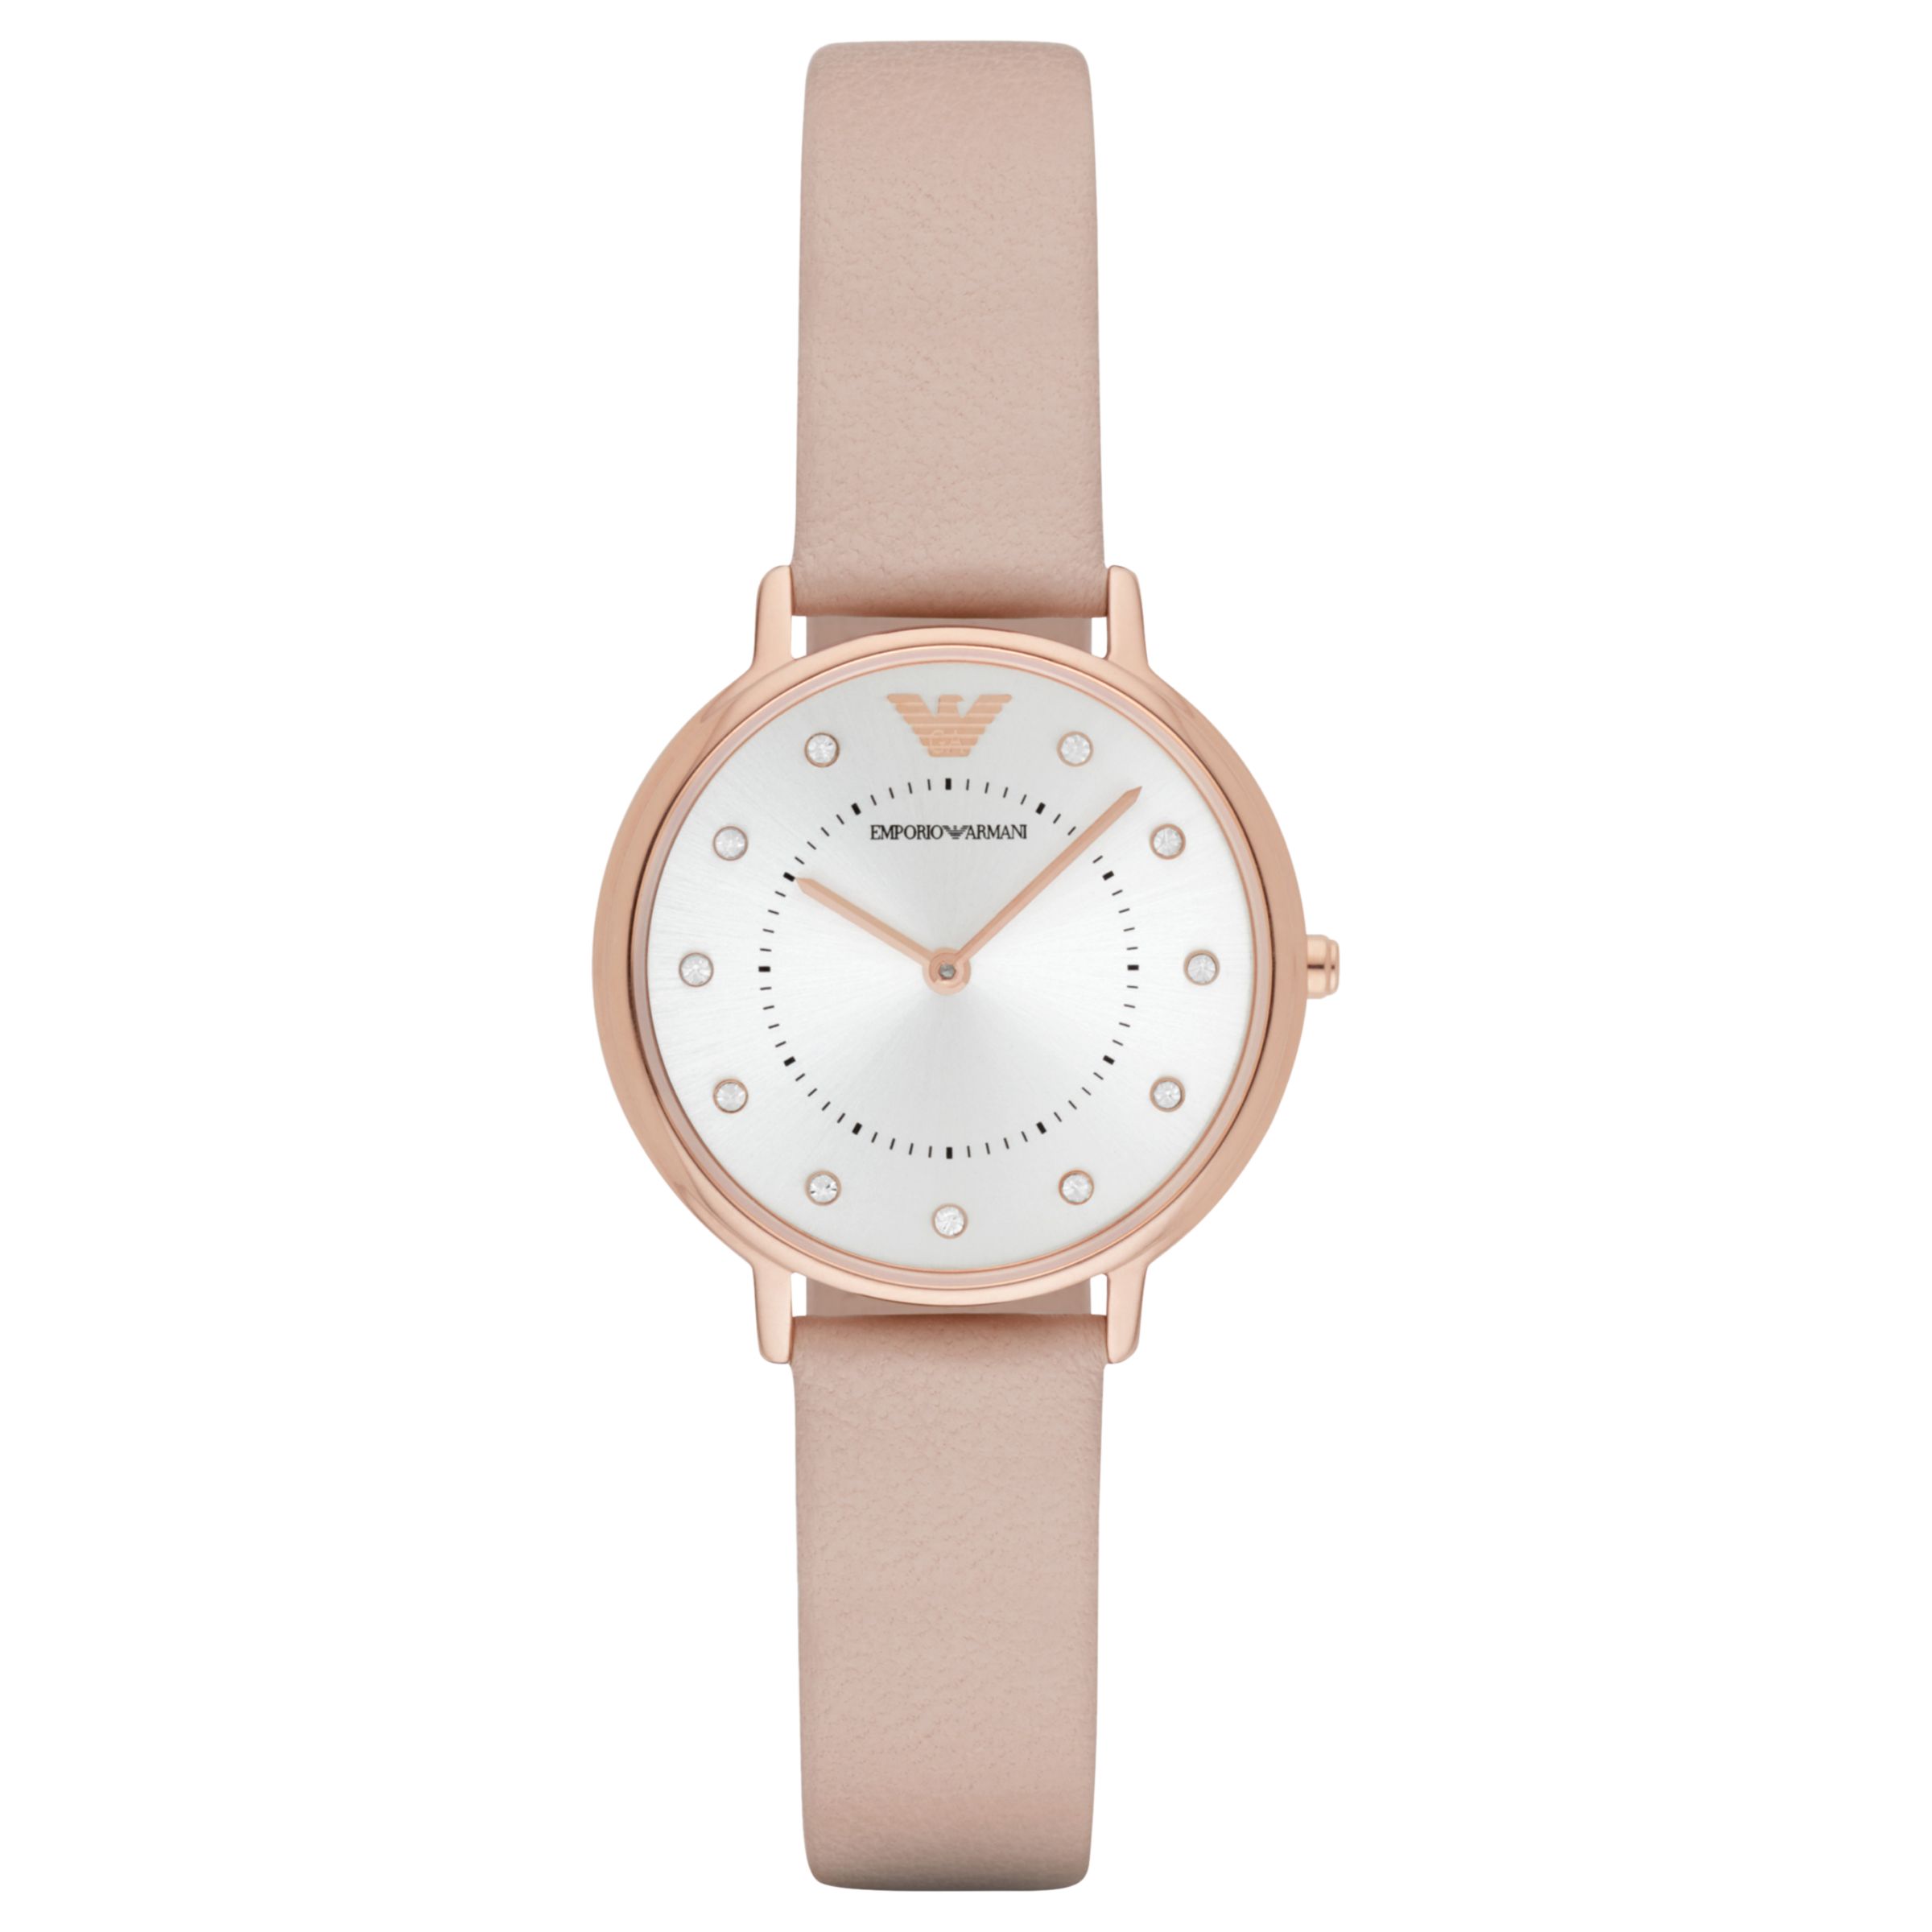 Emporio Armani AR2510 Women's Crystal Leather Strap Watch, Blush  Pink/Silver at John Lewis & Partners